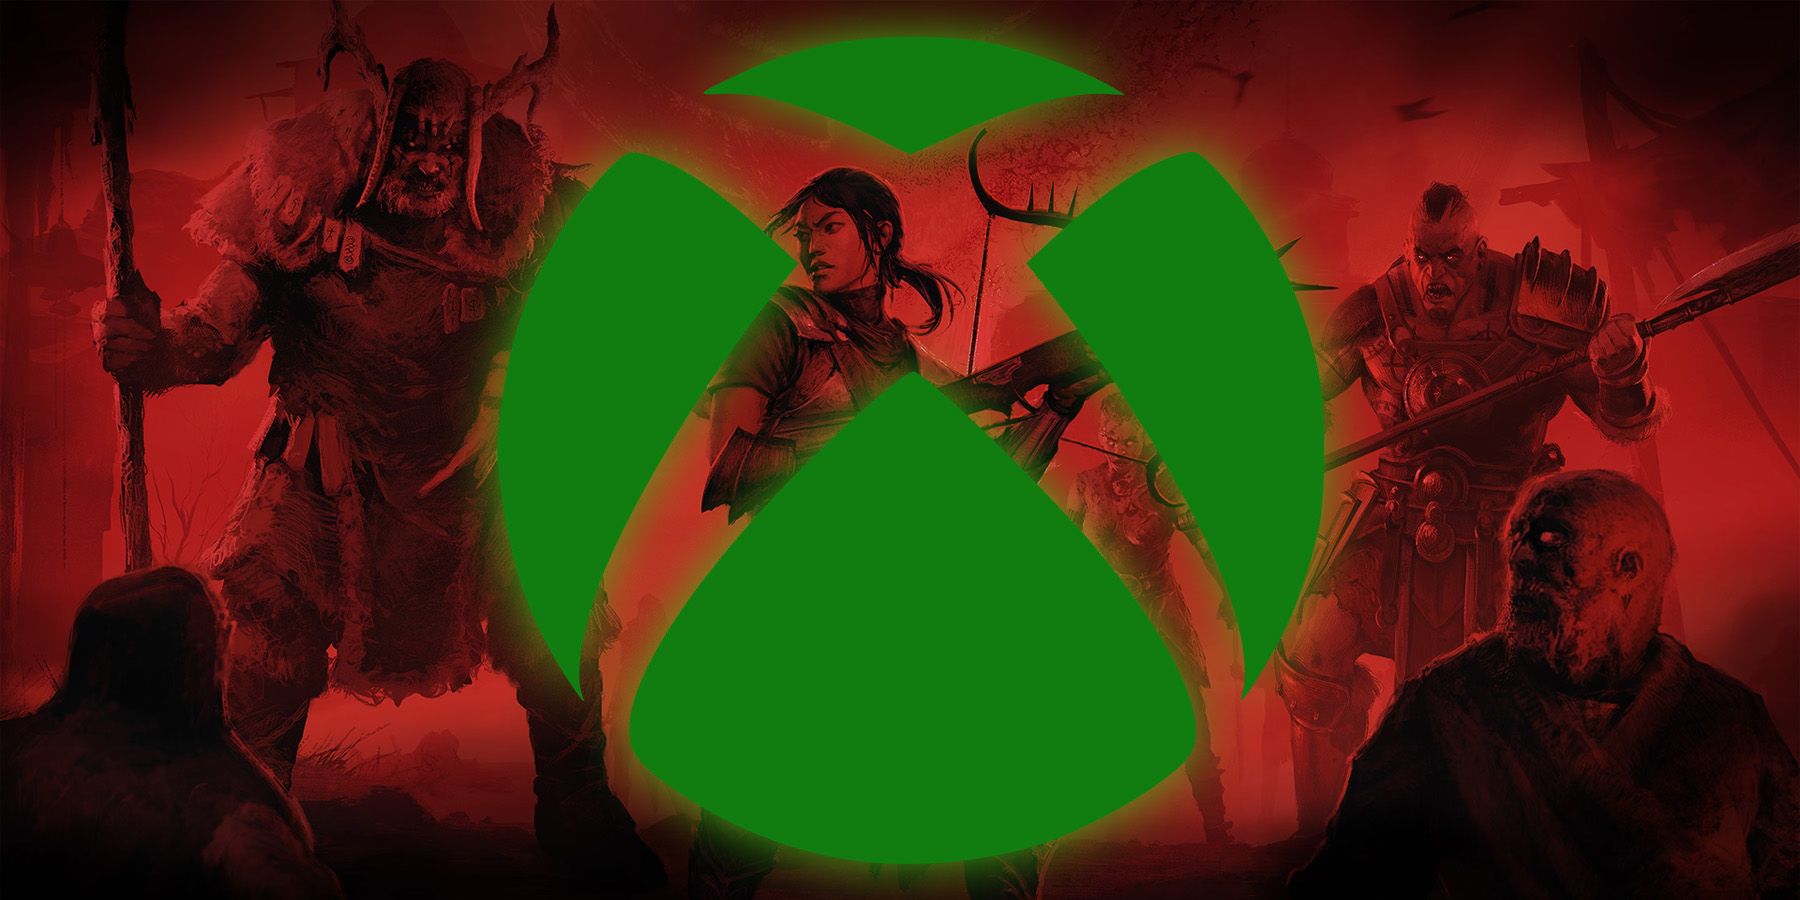 Xbox logo in front of red-tinted art for Diablo 4 sowing various armed characters.